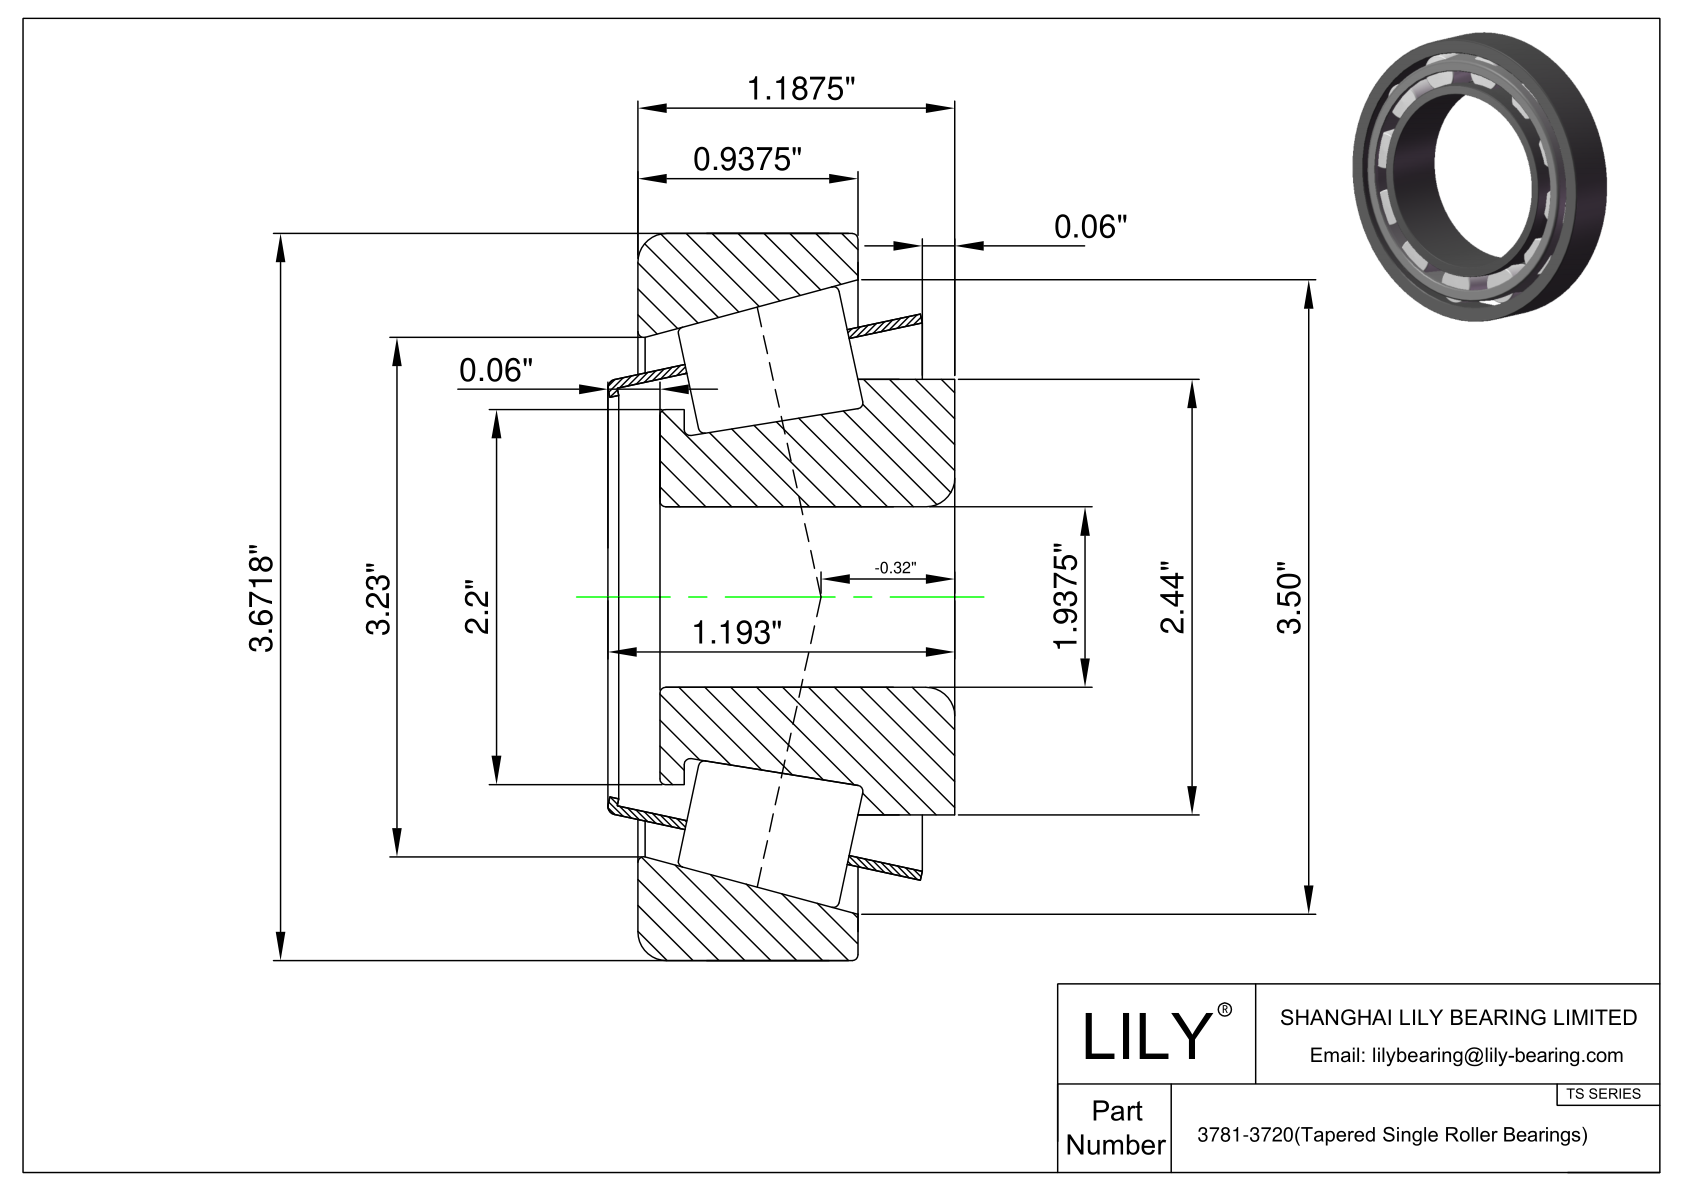 3781-3720 TS (Tapered Single Roller Bearings) (Imperial) cad drawing